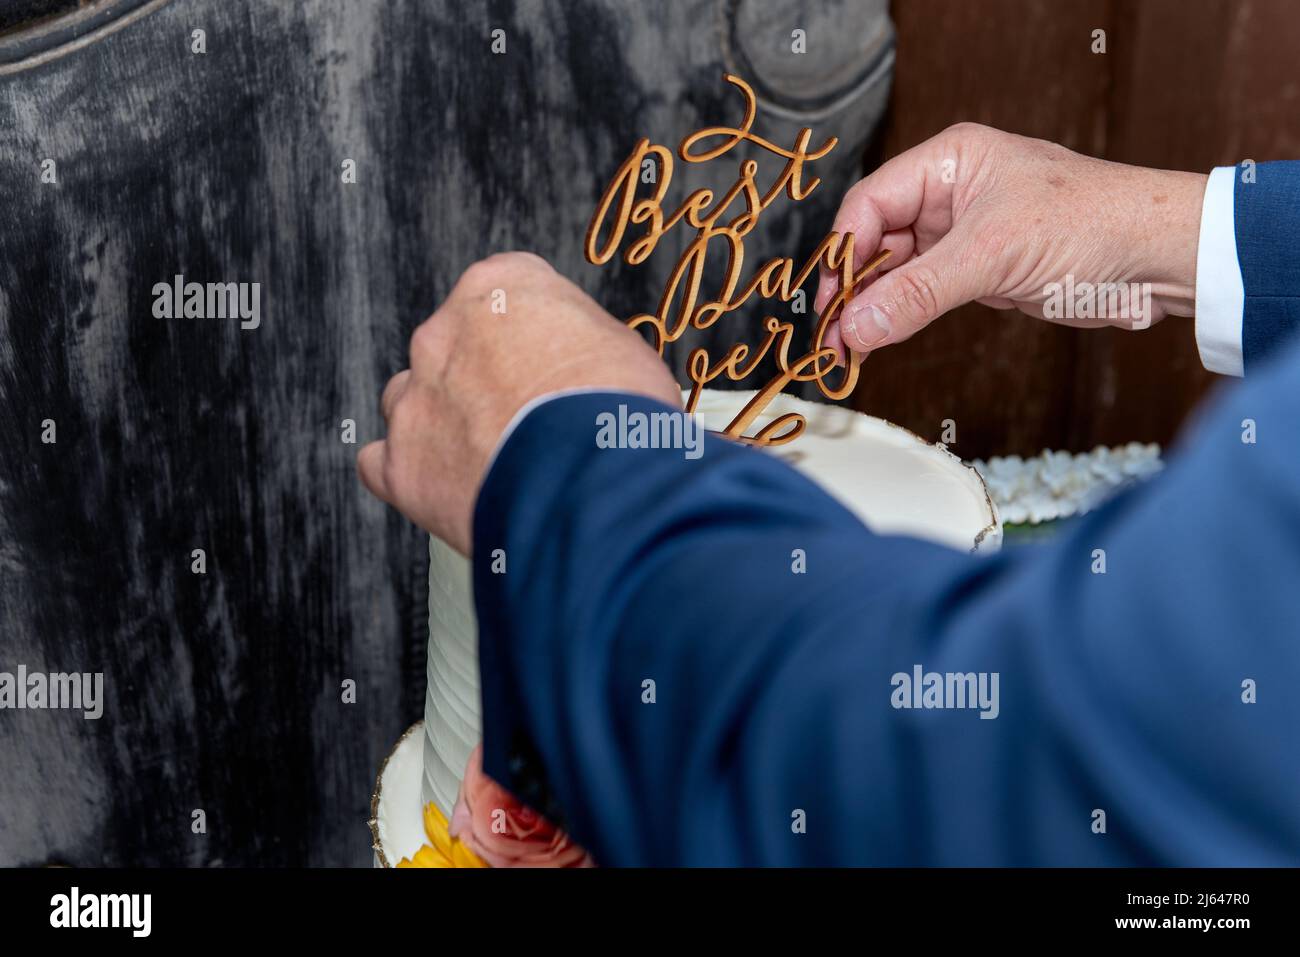 Hands of the groom finding the center of the wedding cake to properly place the topper with clever quote. Stock Photo